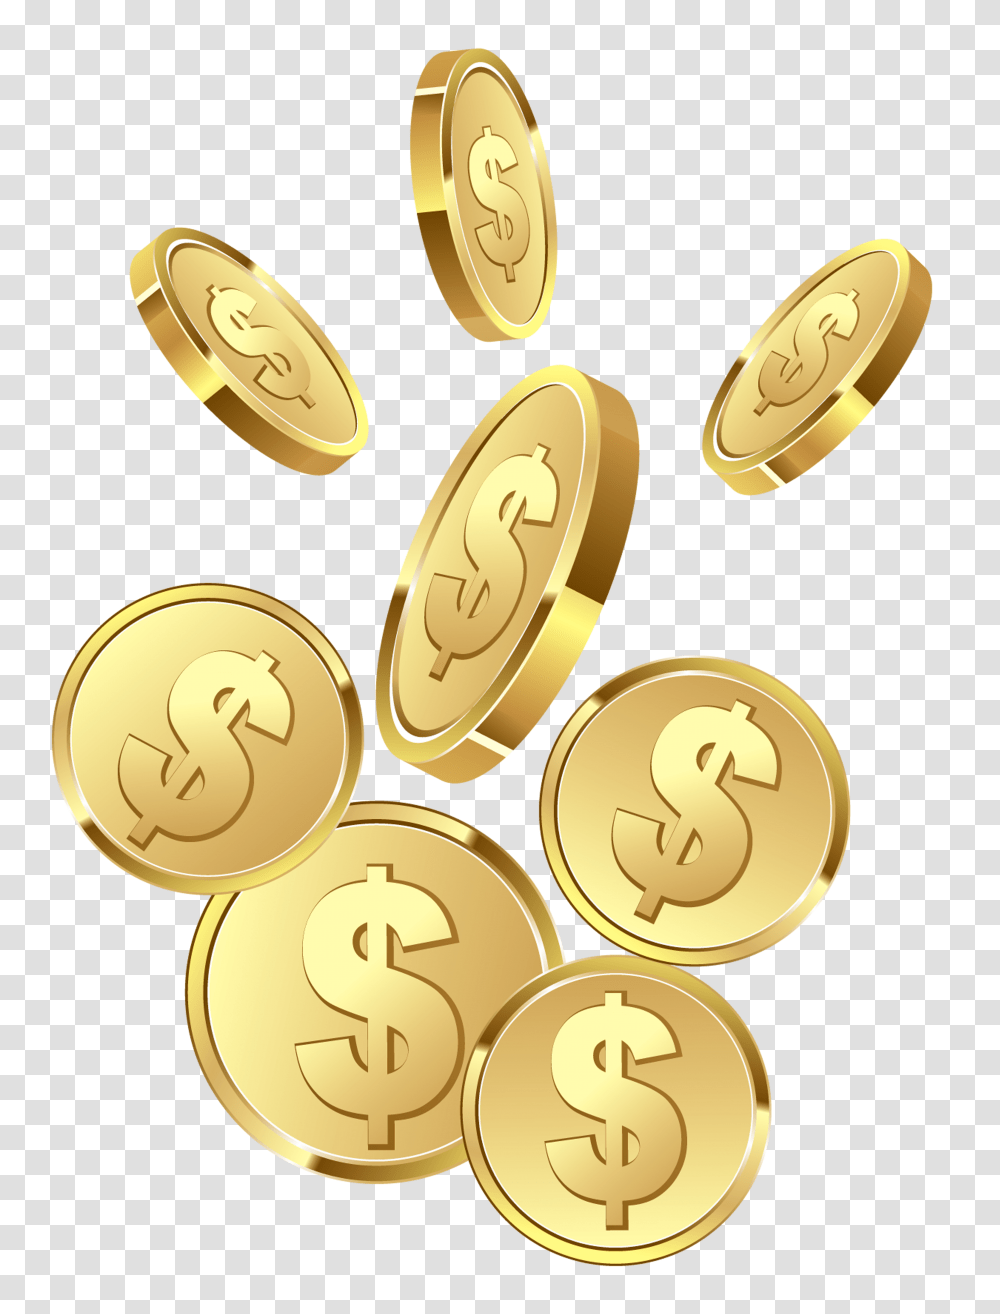 Gold Coins Image Purepng Free Cc0 Background Coins Clipart, Gold Medal, Trophy Transparent Png